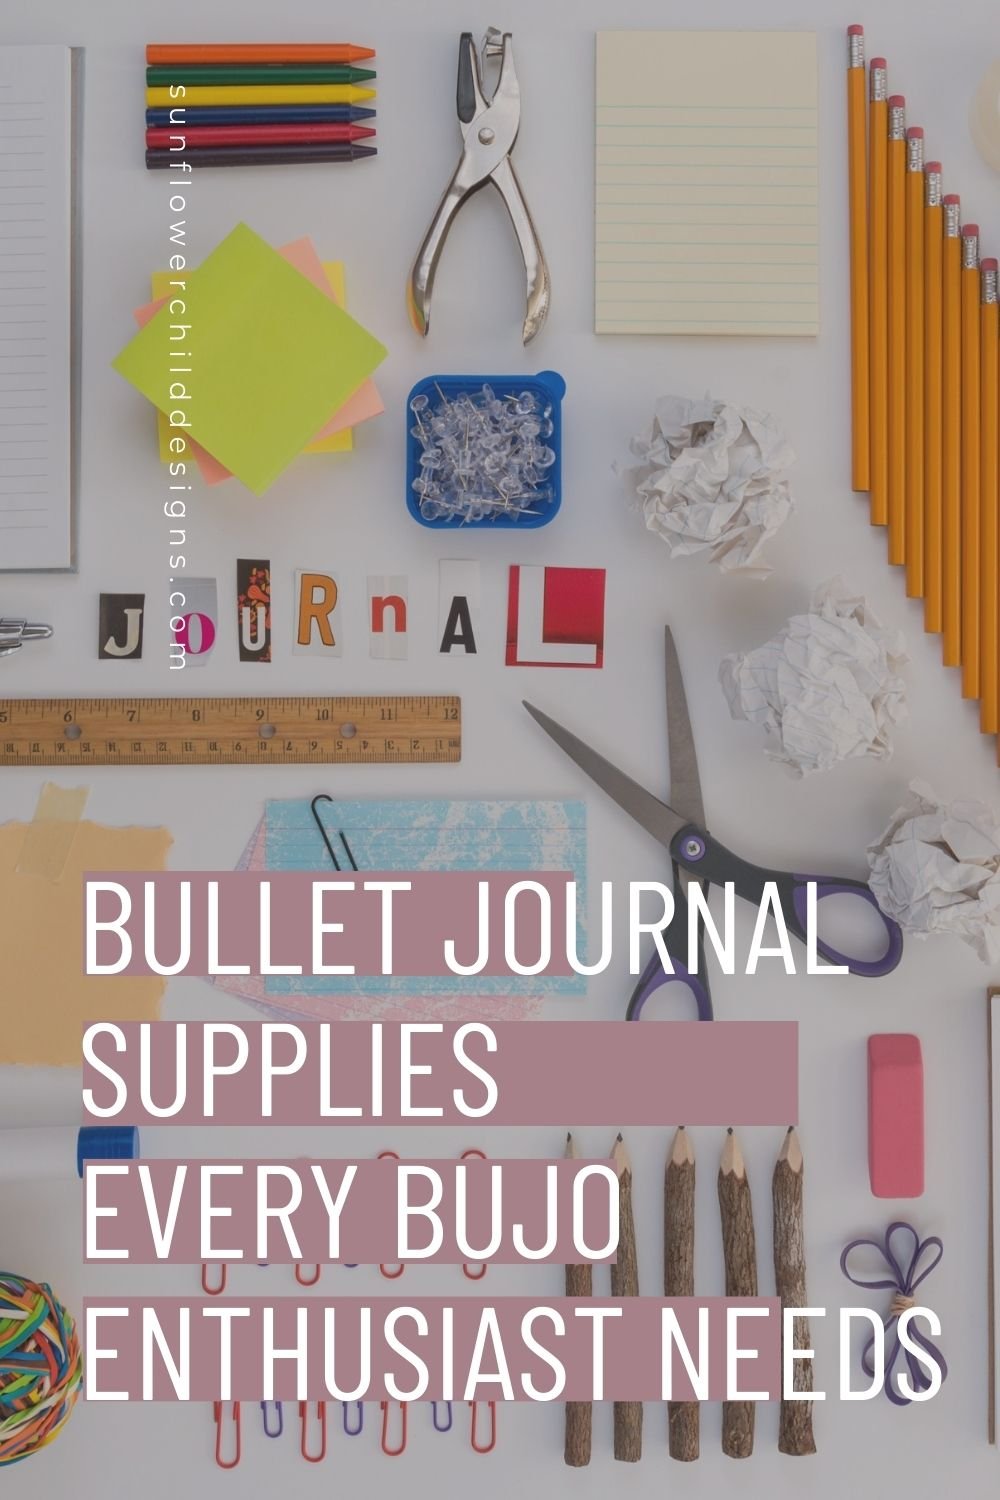 Entity Mag Shares Interesting Bullet Journal Supplies